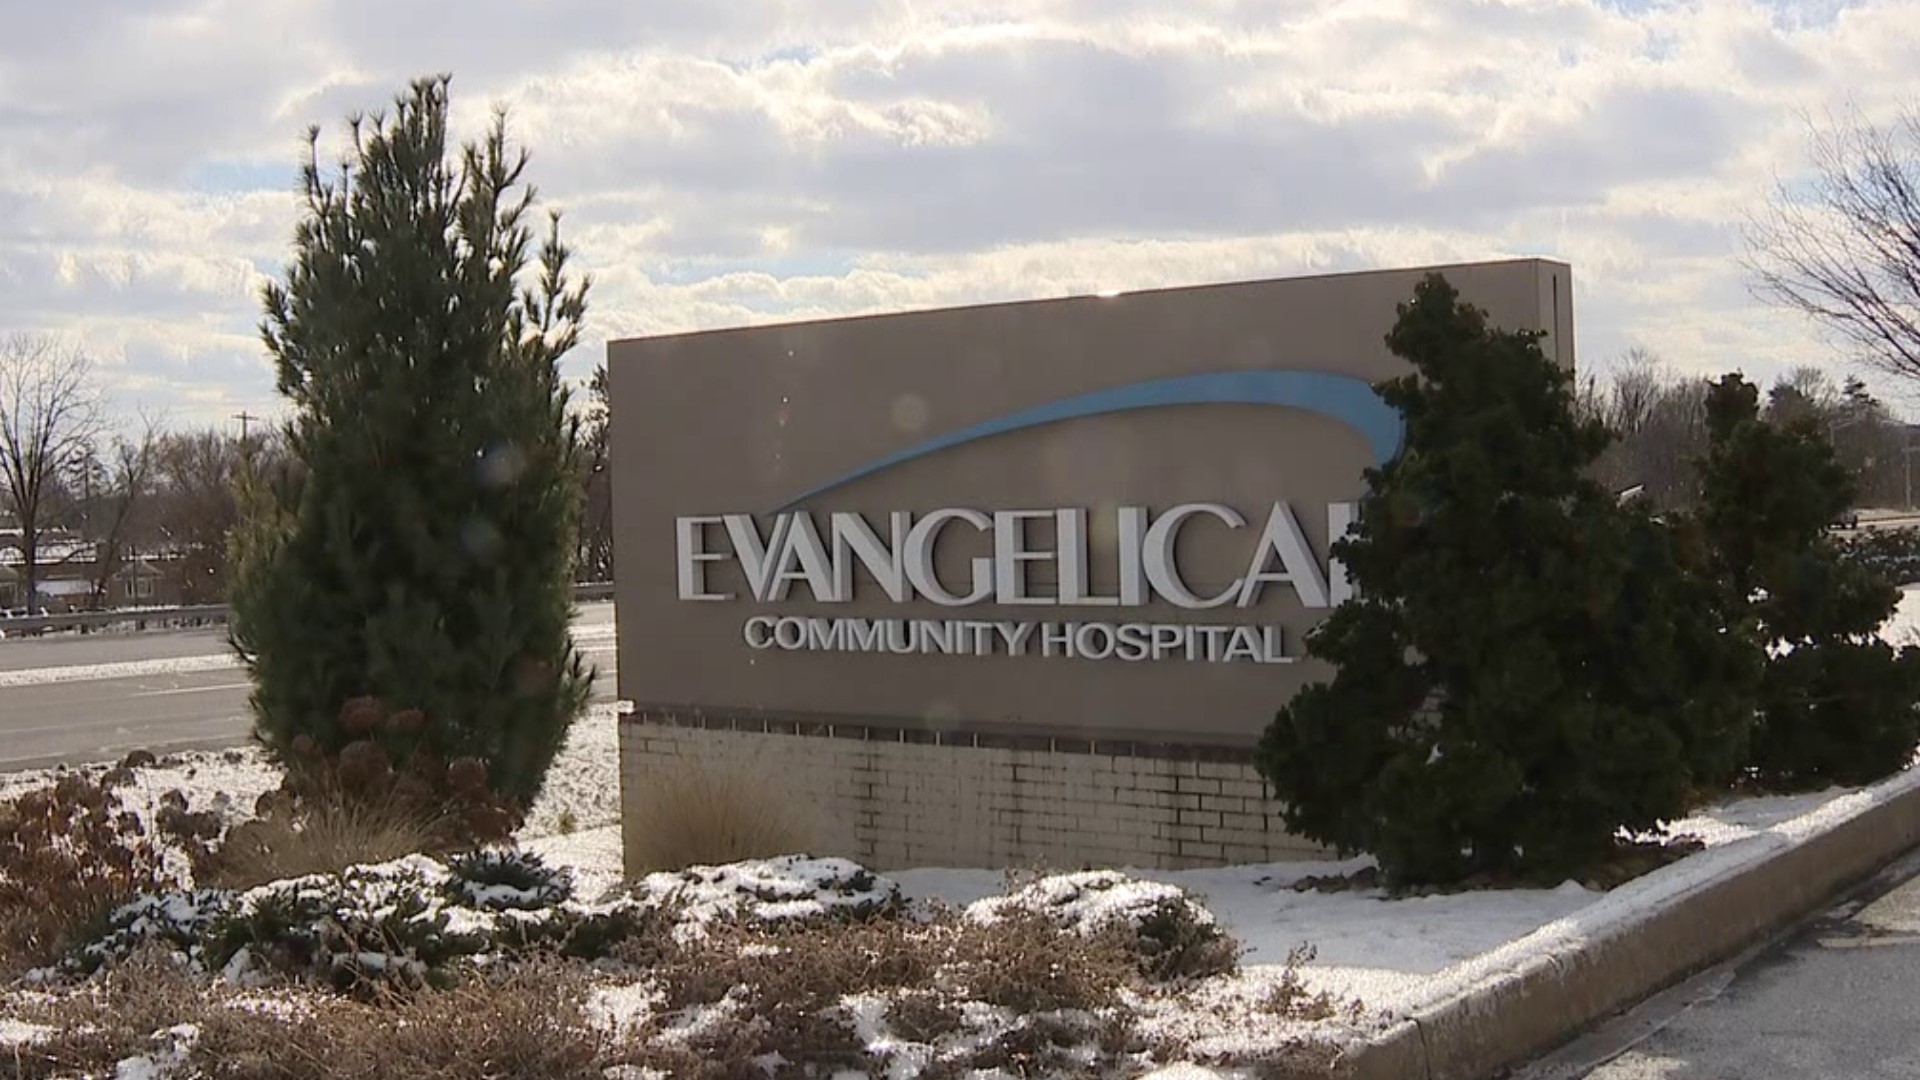 Evangelical Community Hospital near Lewisburg currently has more than 50 employees out sick with COVID-19.